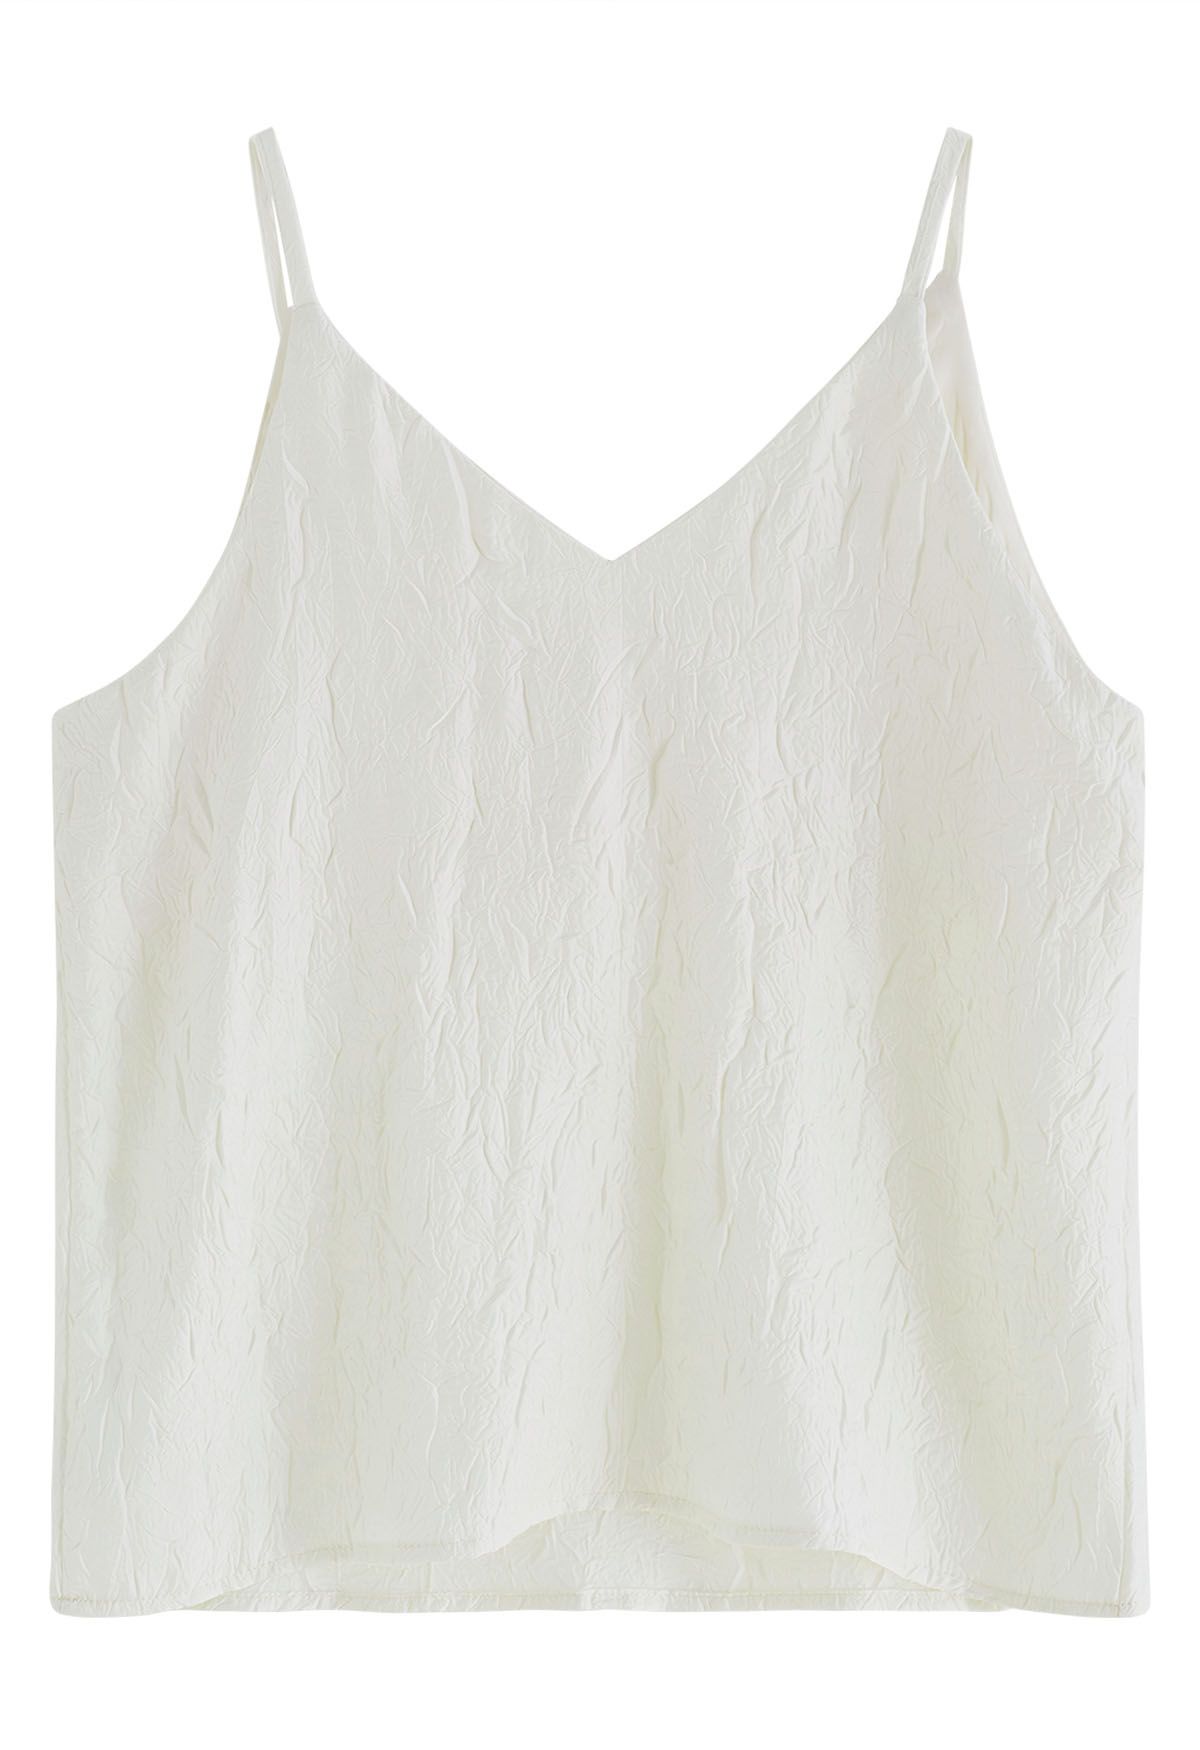 Embossed Texture V-Neck Cami Top in White - Retro, Indie and